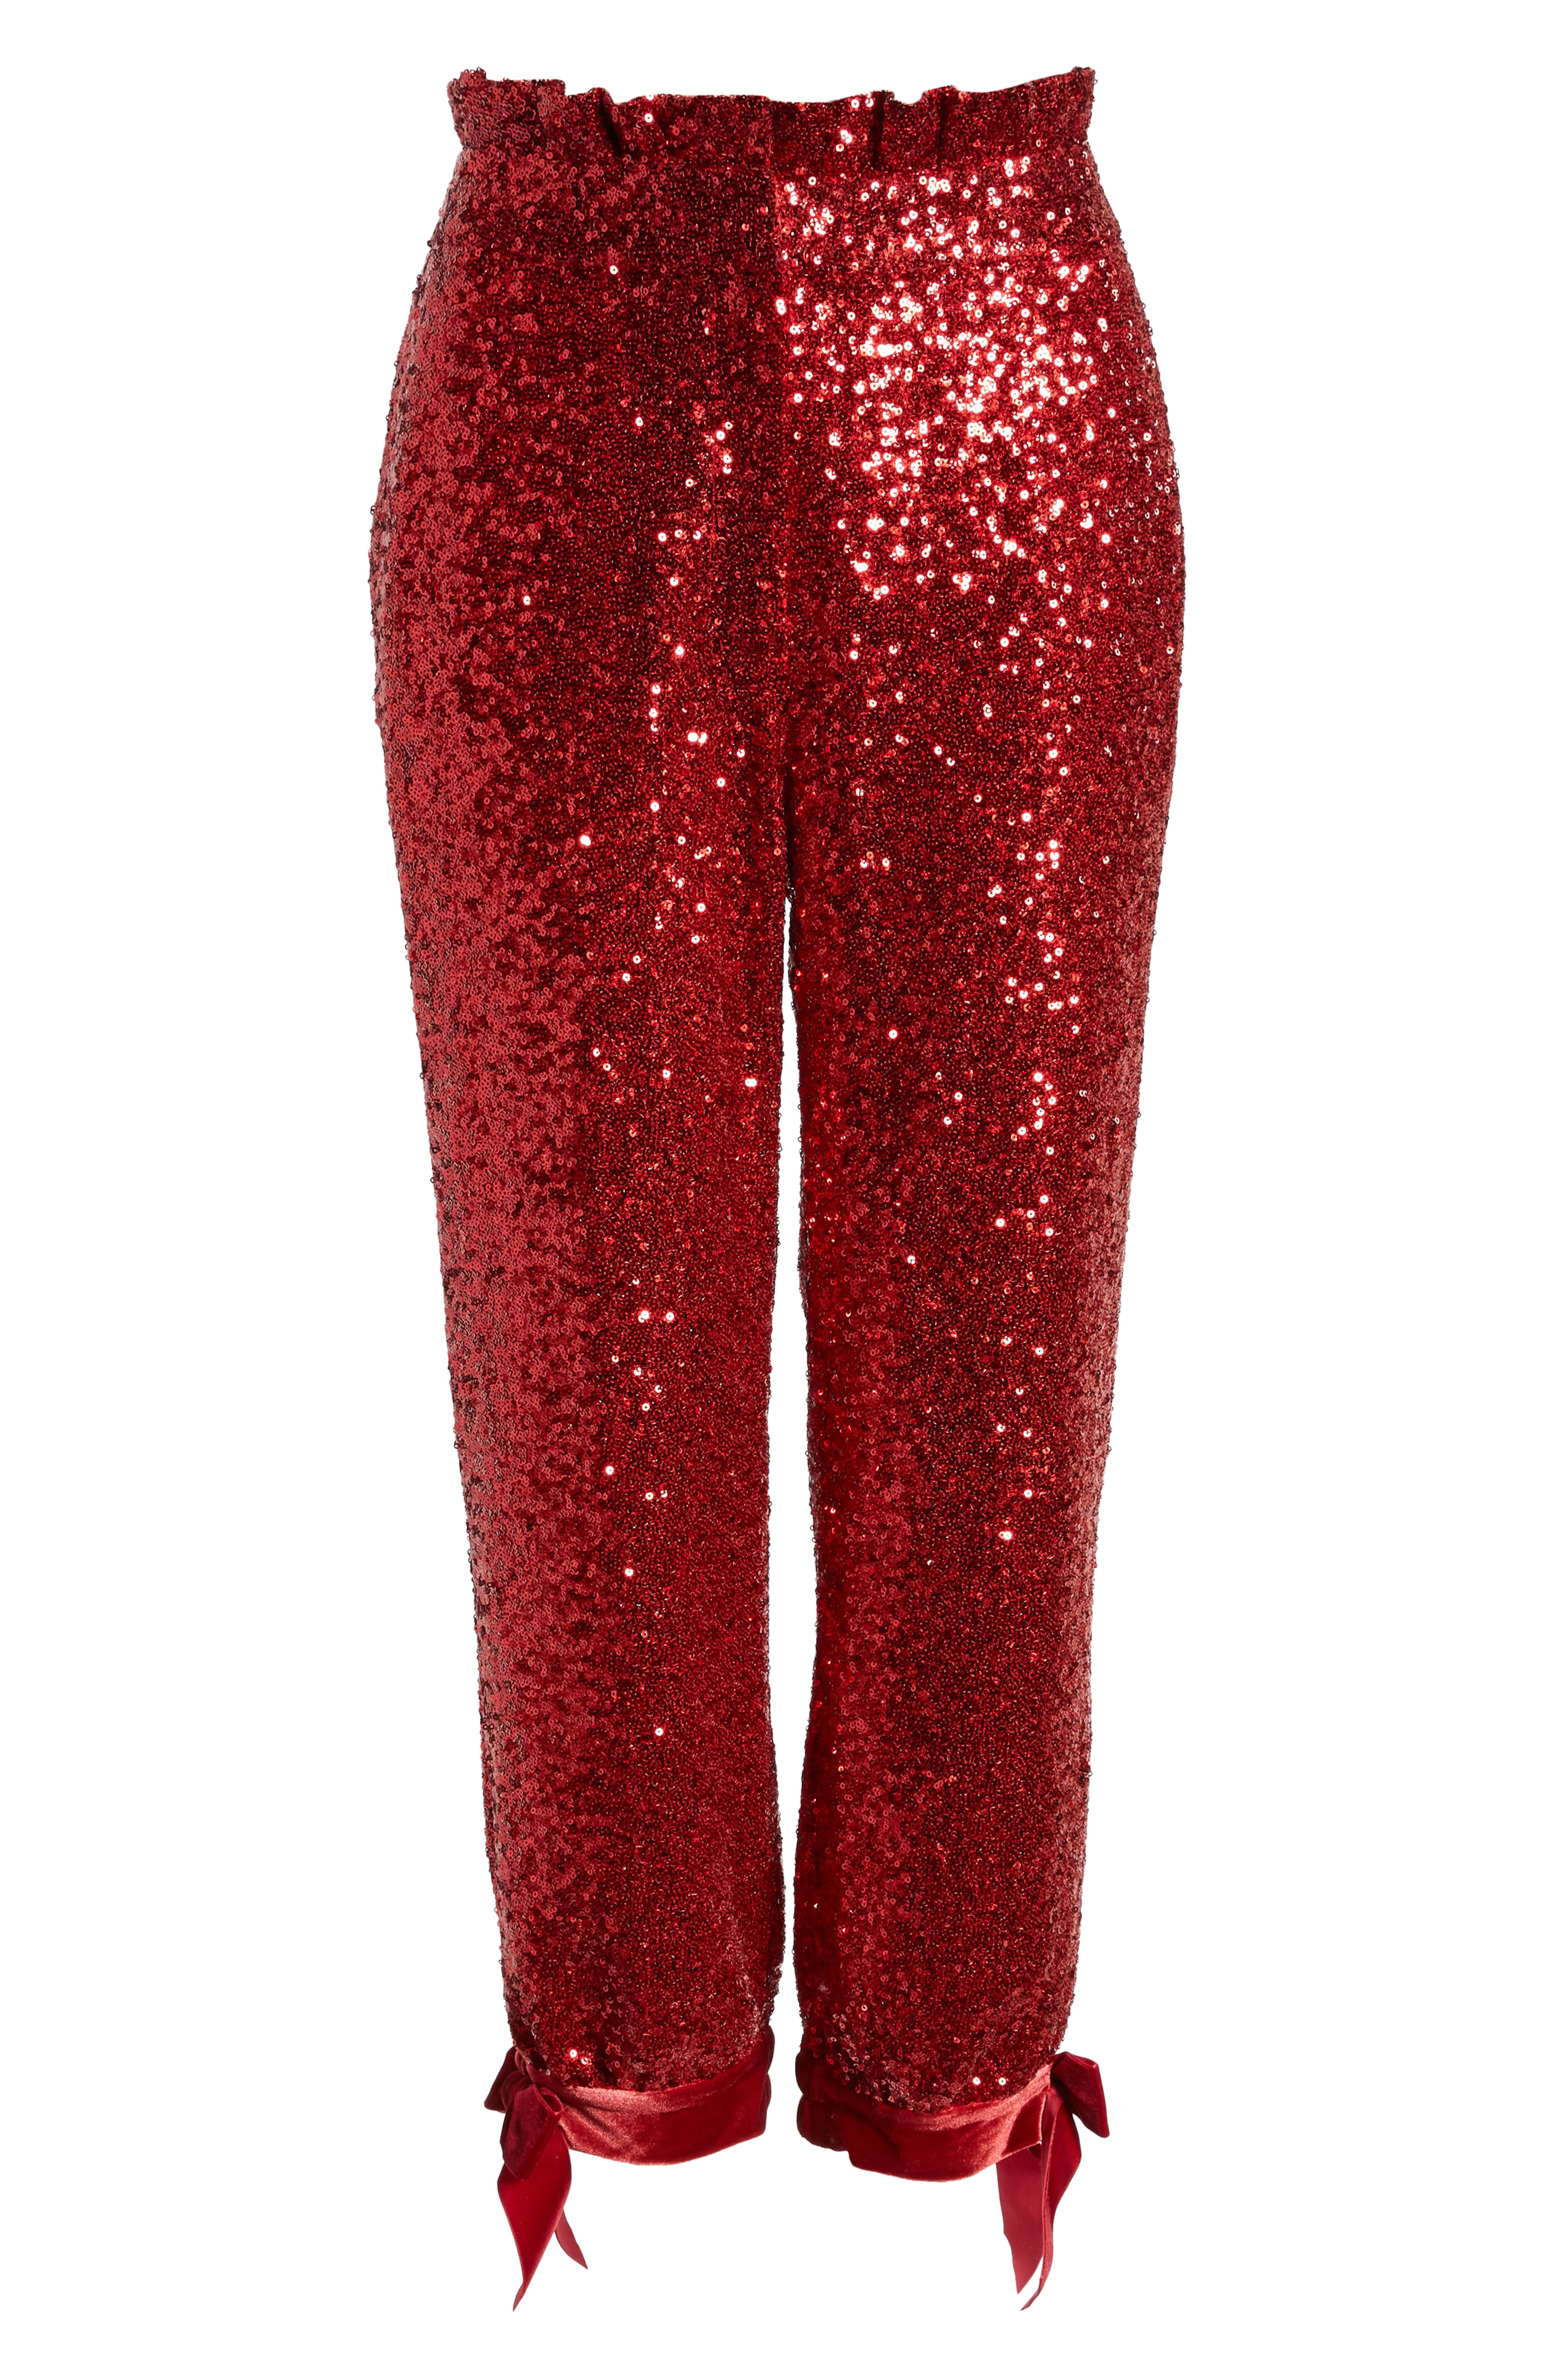 Celebrate Your Dramatic Ways With These Attention-Grabbing Pants